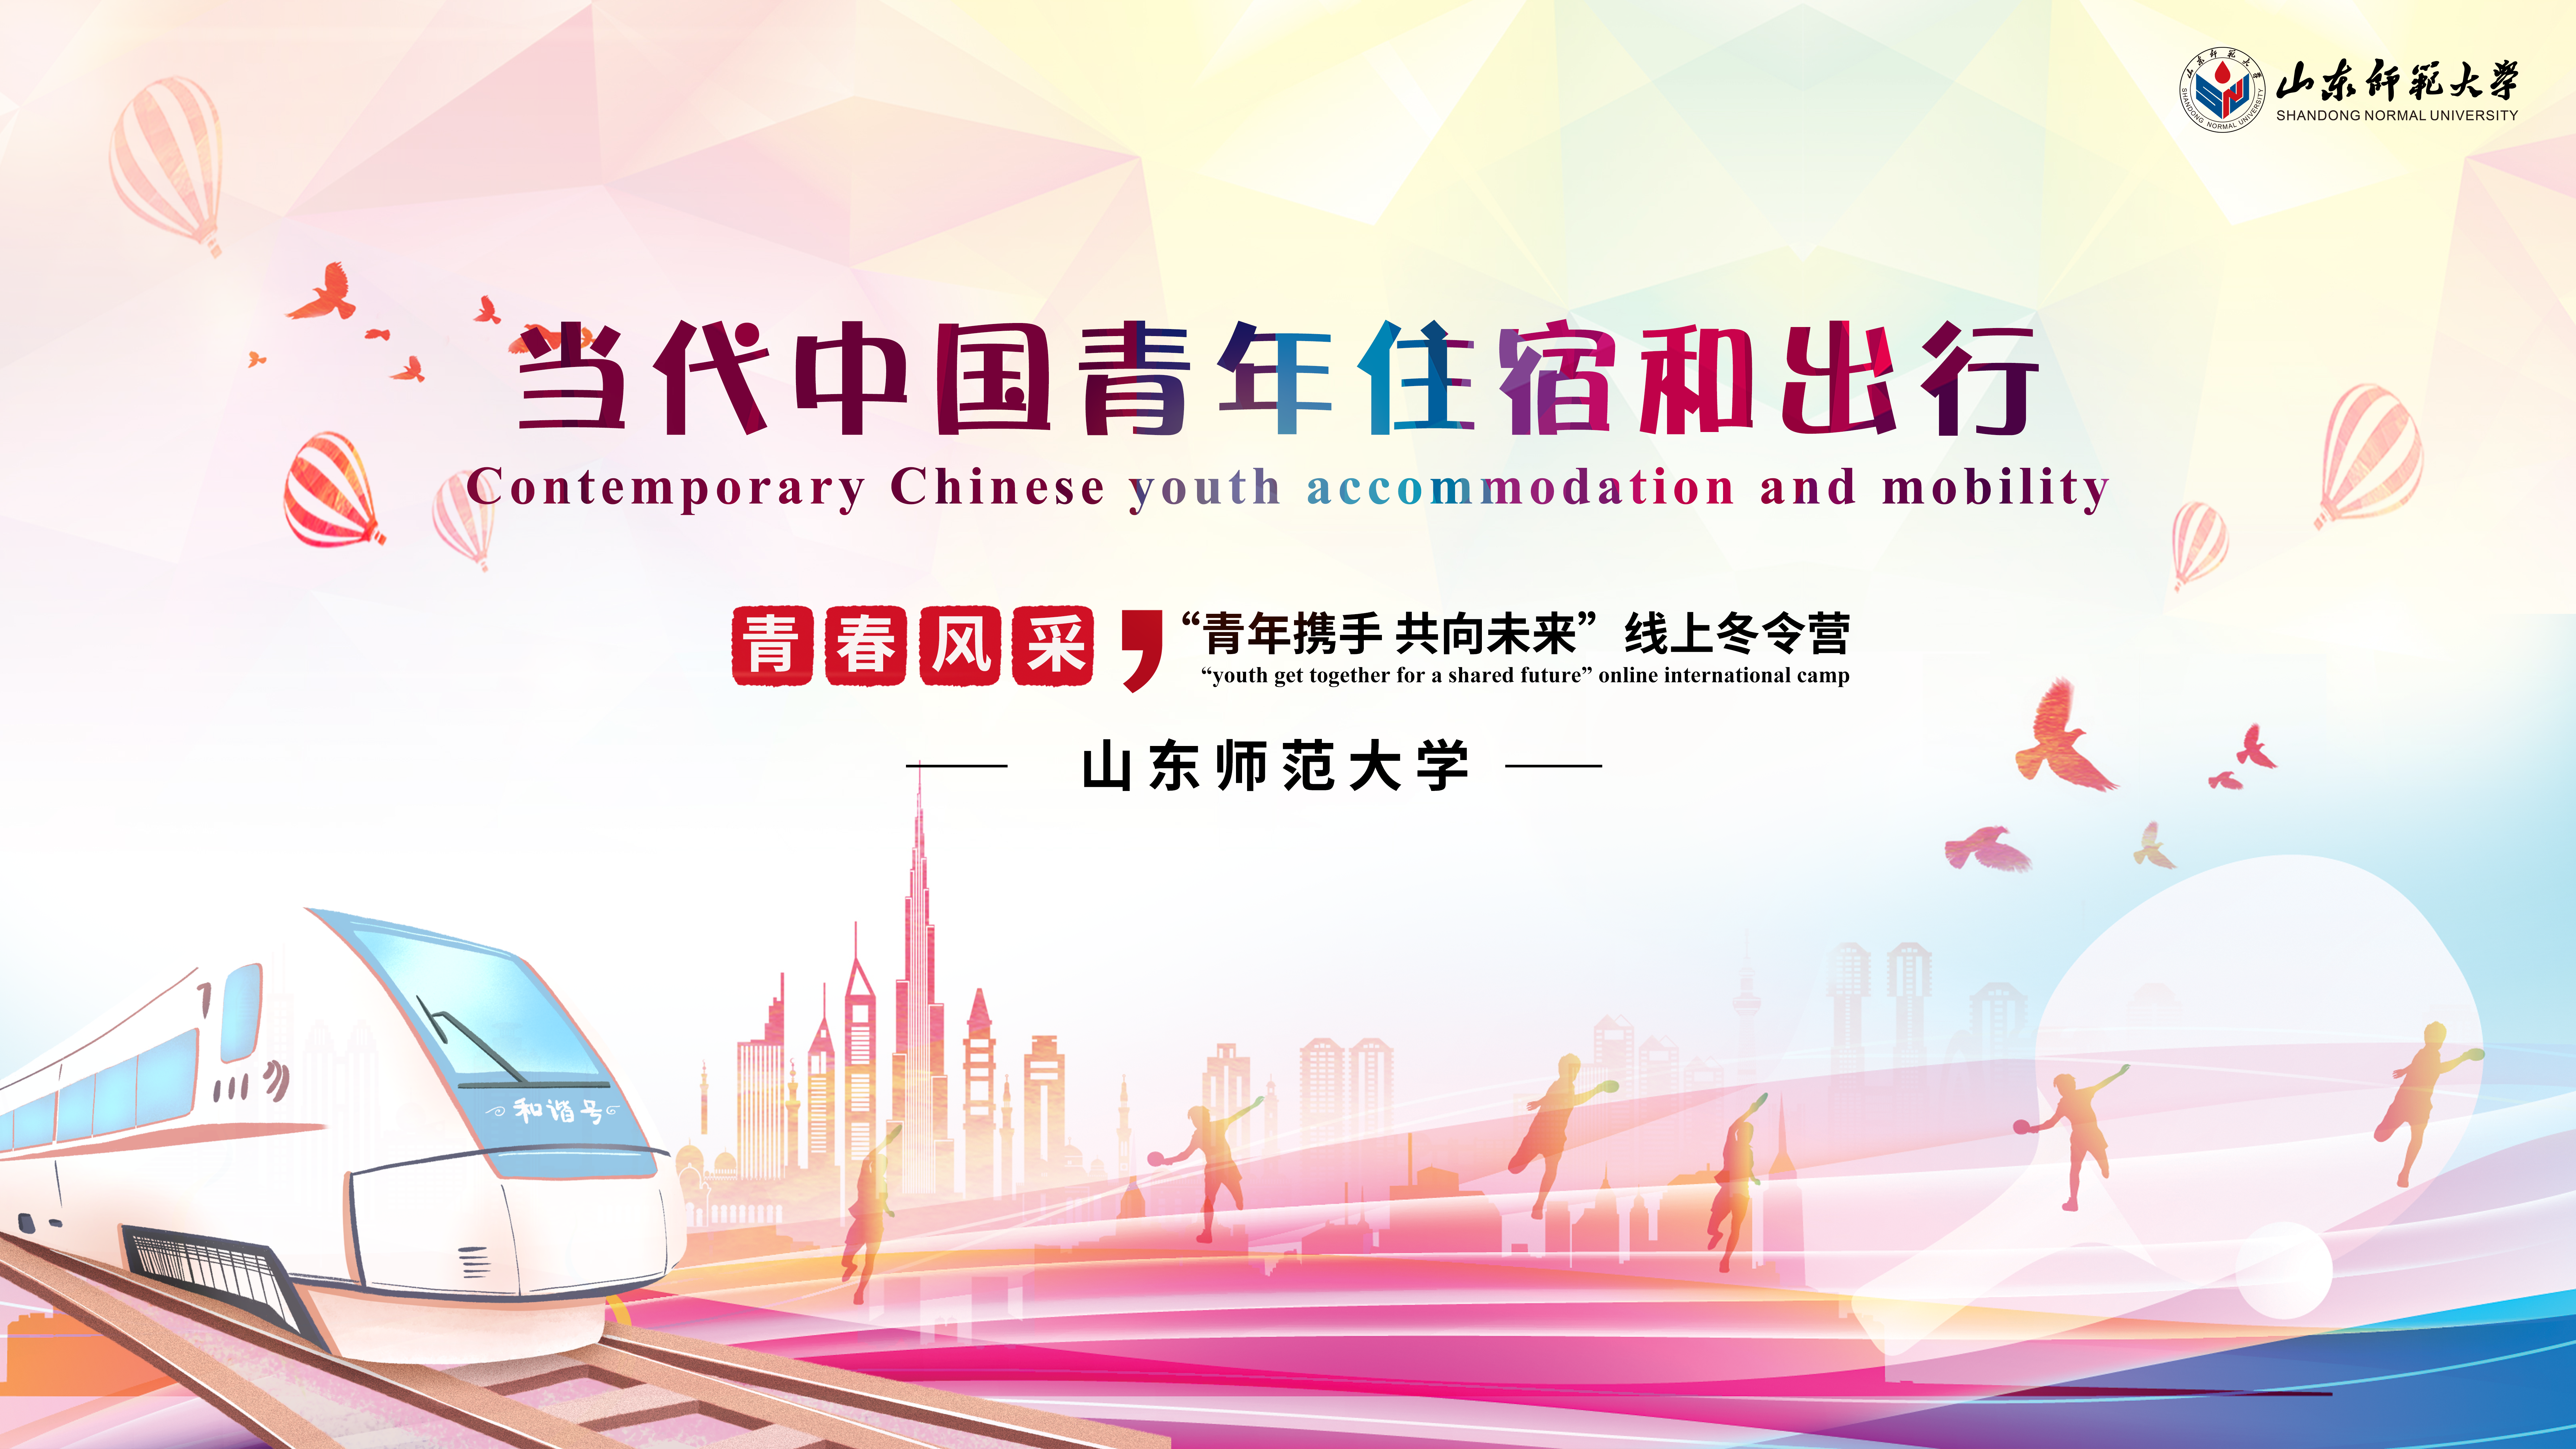 Contemporary Chinese youth accommodation and mobility